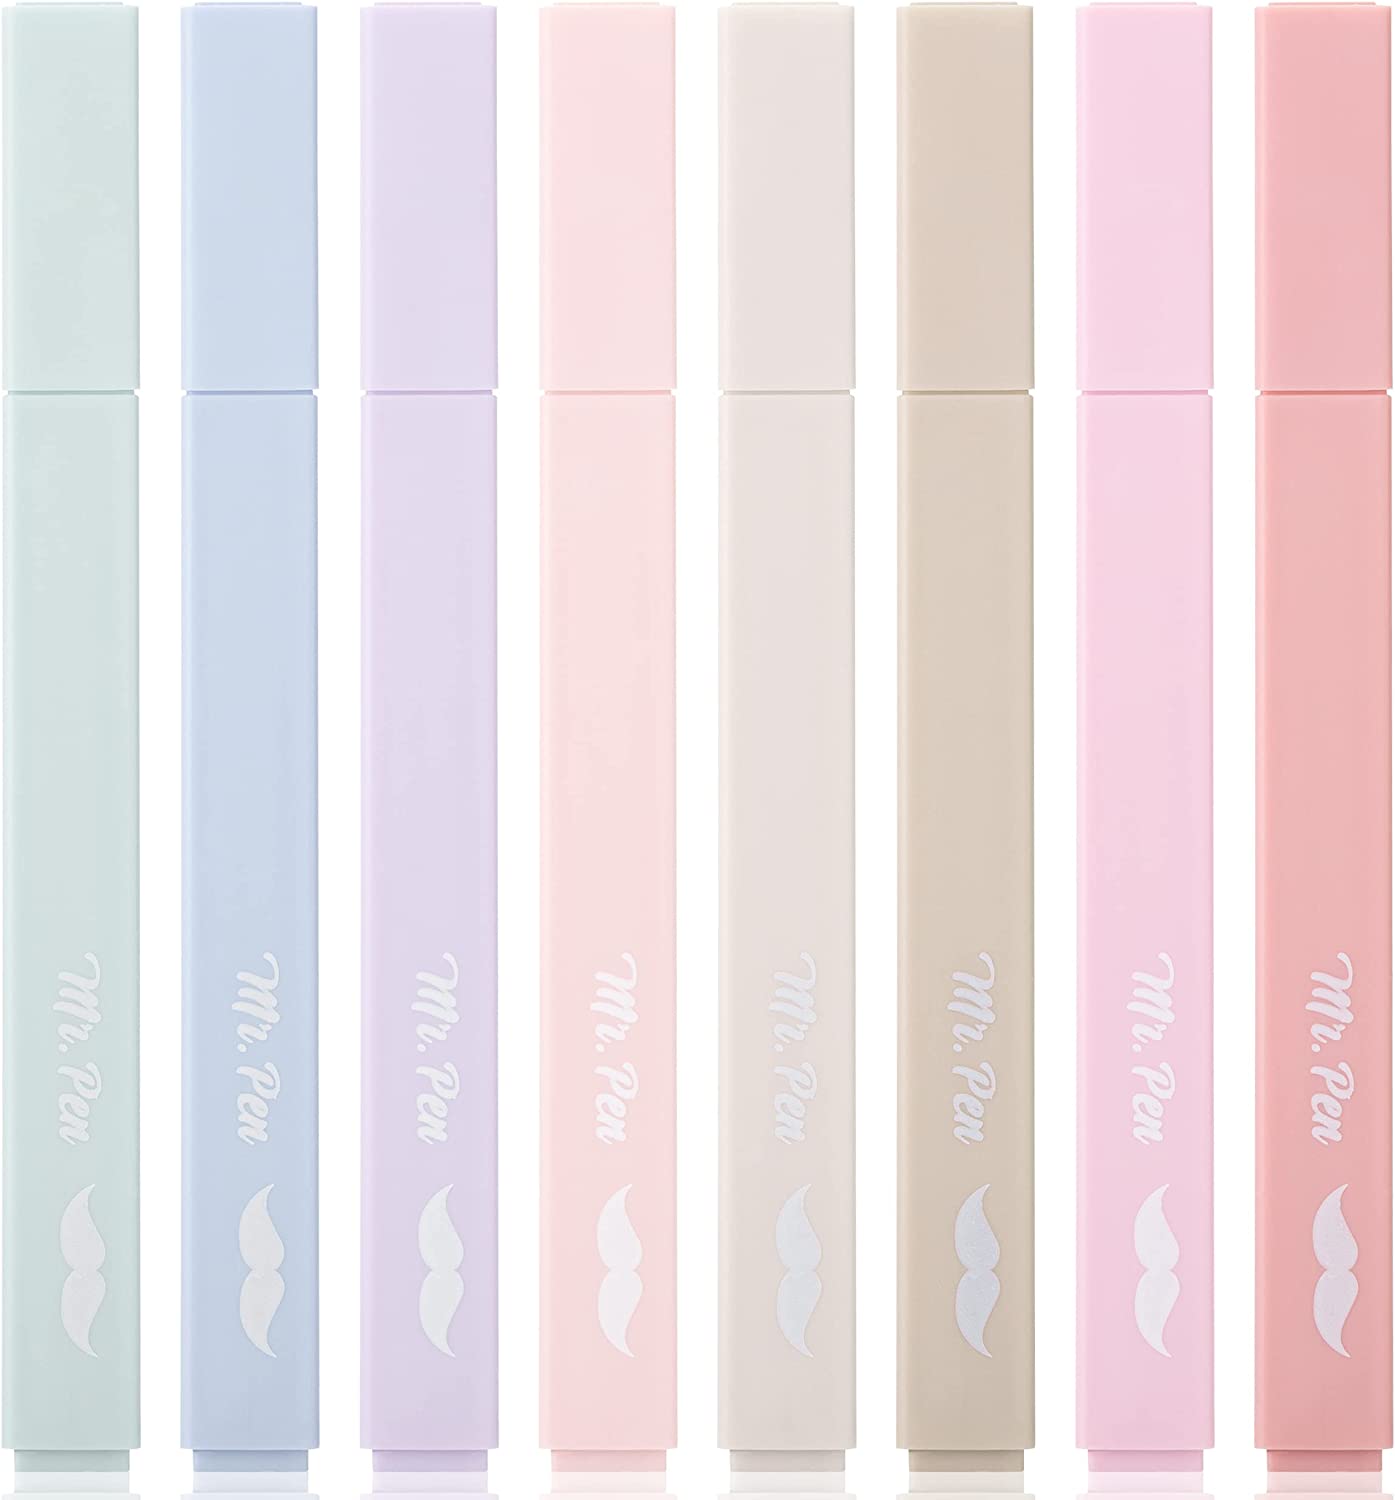 Mr. Pen- Pastel Highlighters, 8 Pack, Chisel Tip, Assorted Colors,  Highlighters, No Smear Highlighter